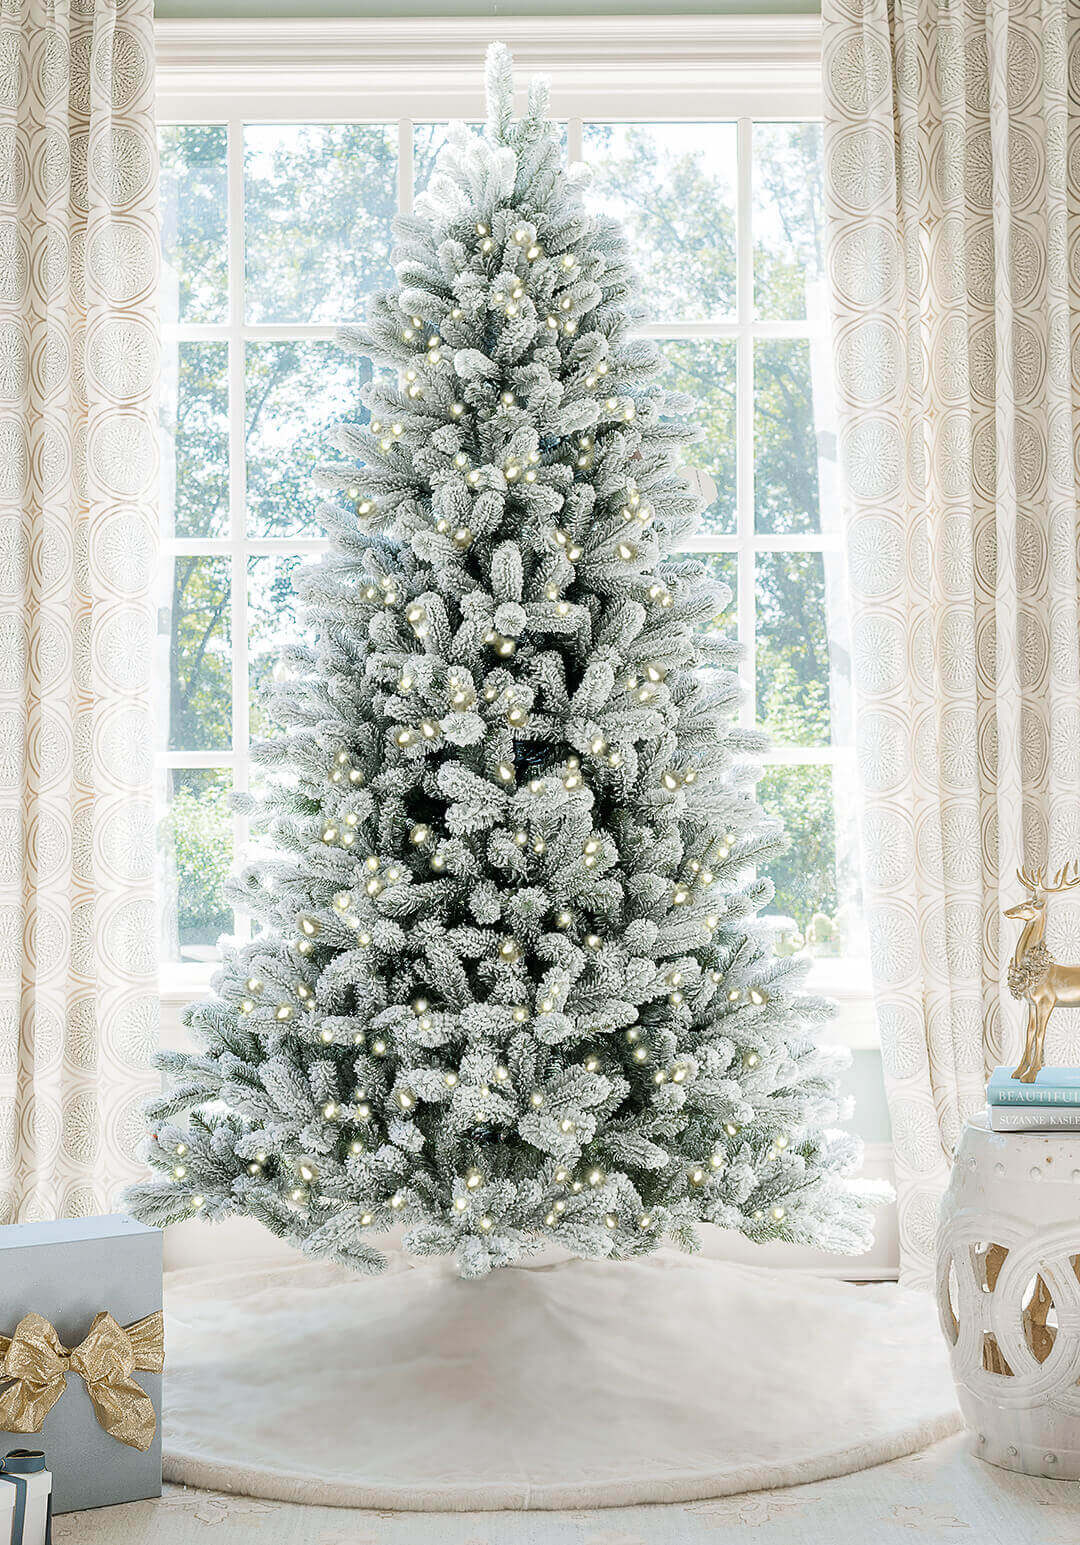 King of Christmas 9' King Flock® Artificial Christmas Tree with 1100 Warm White LED Lights